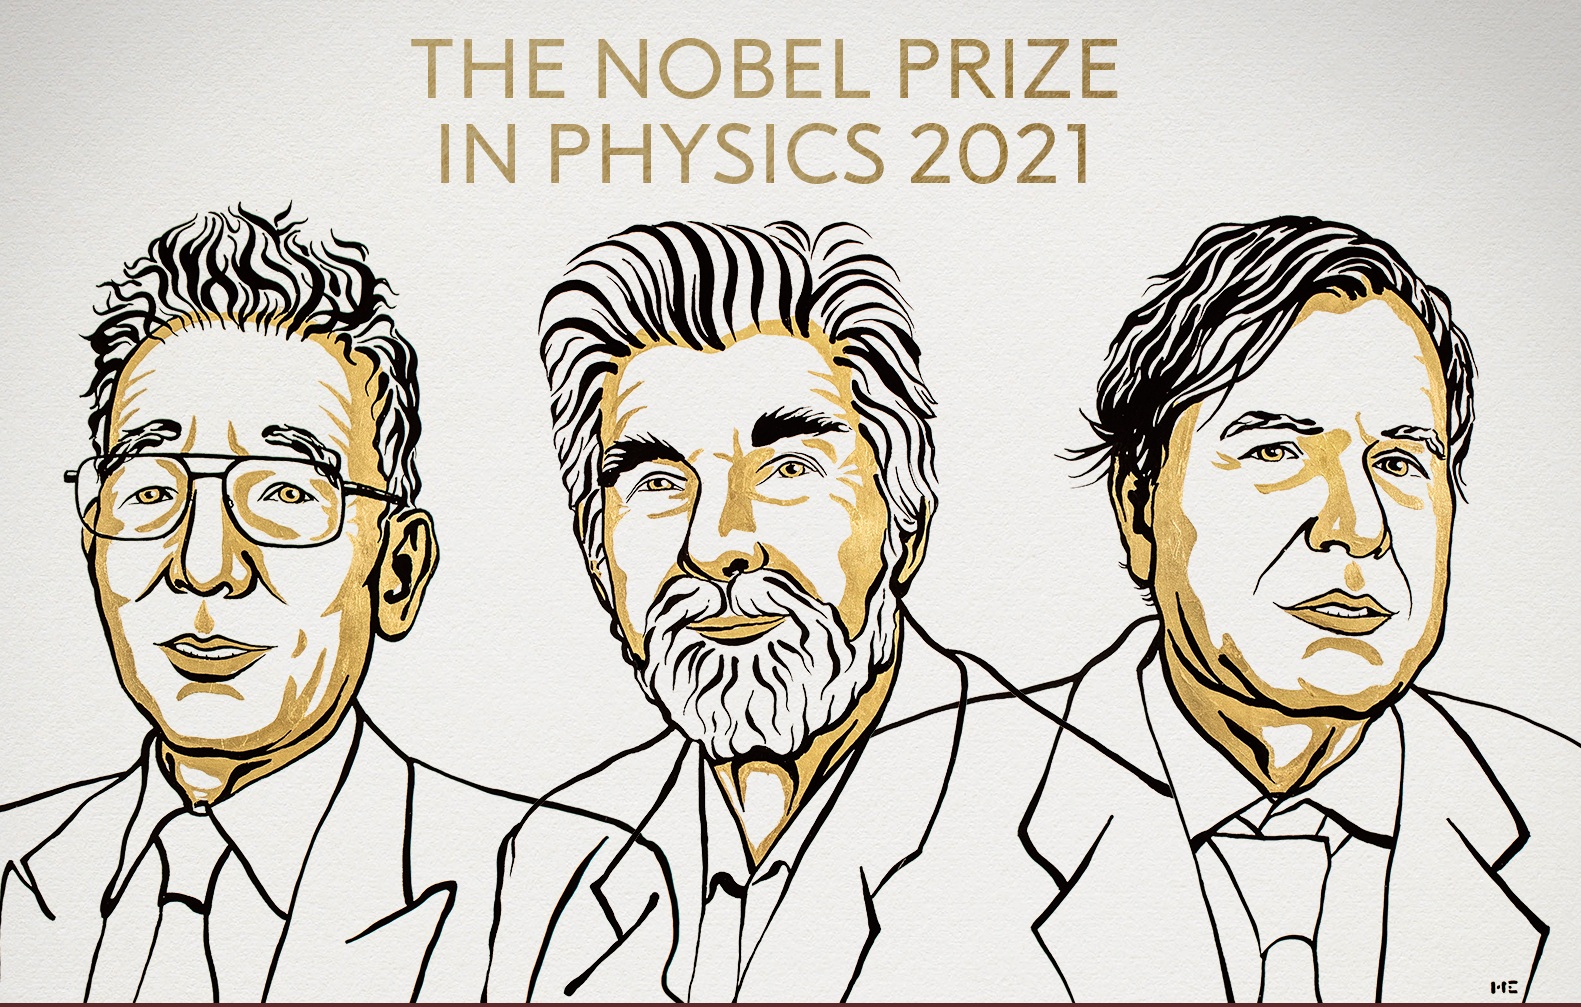 2021 Nobel Prize in Physics to Manabe, Hasselmann and Parisi 